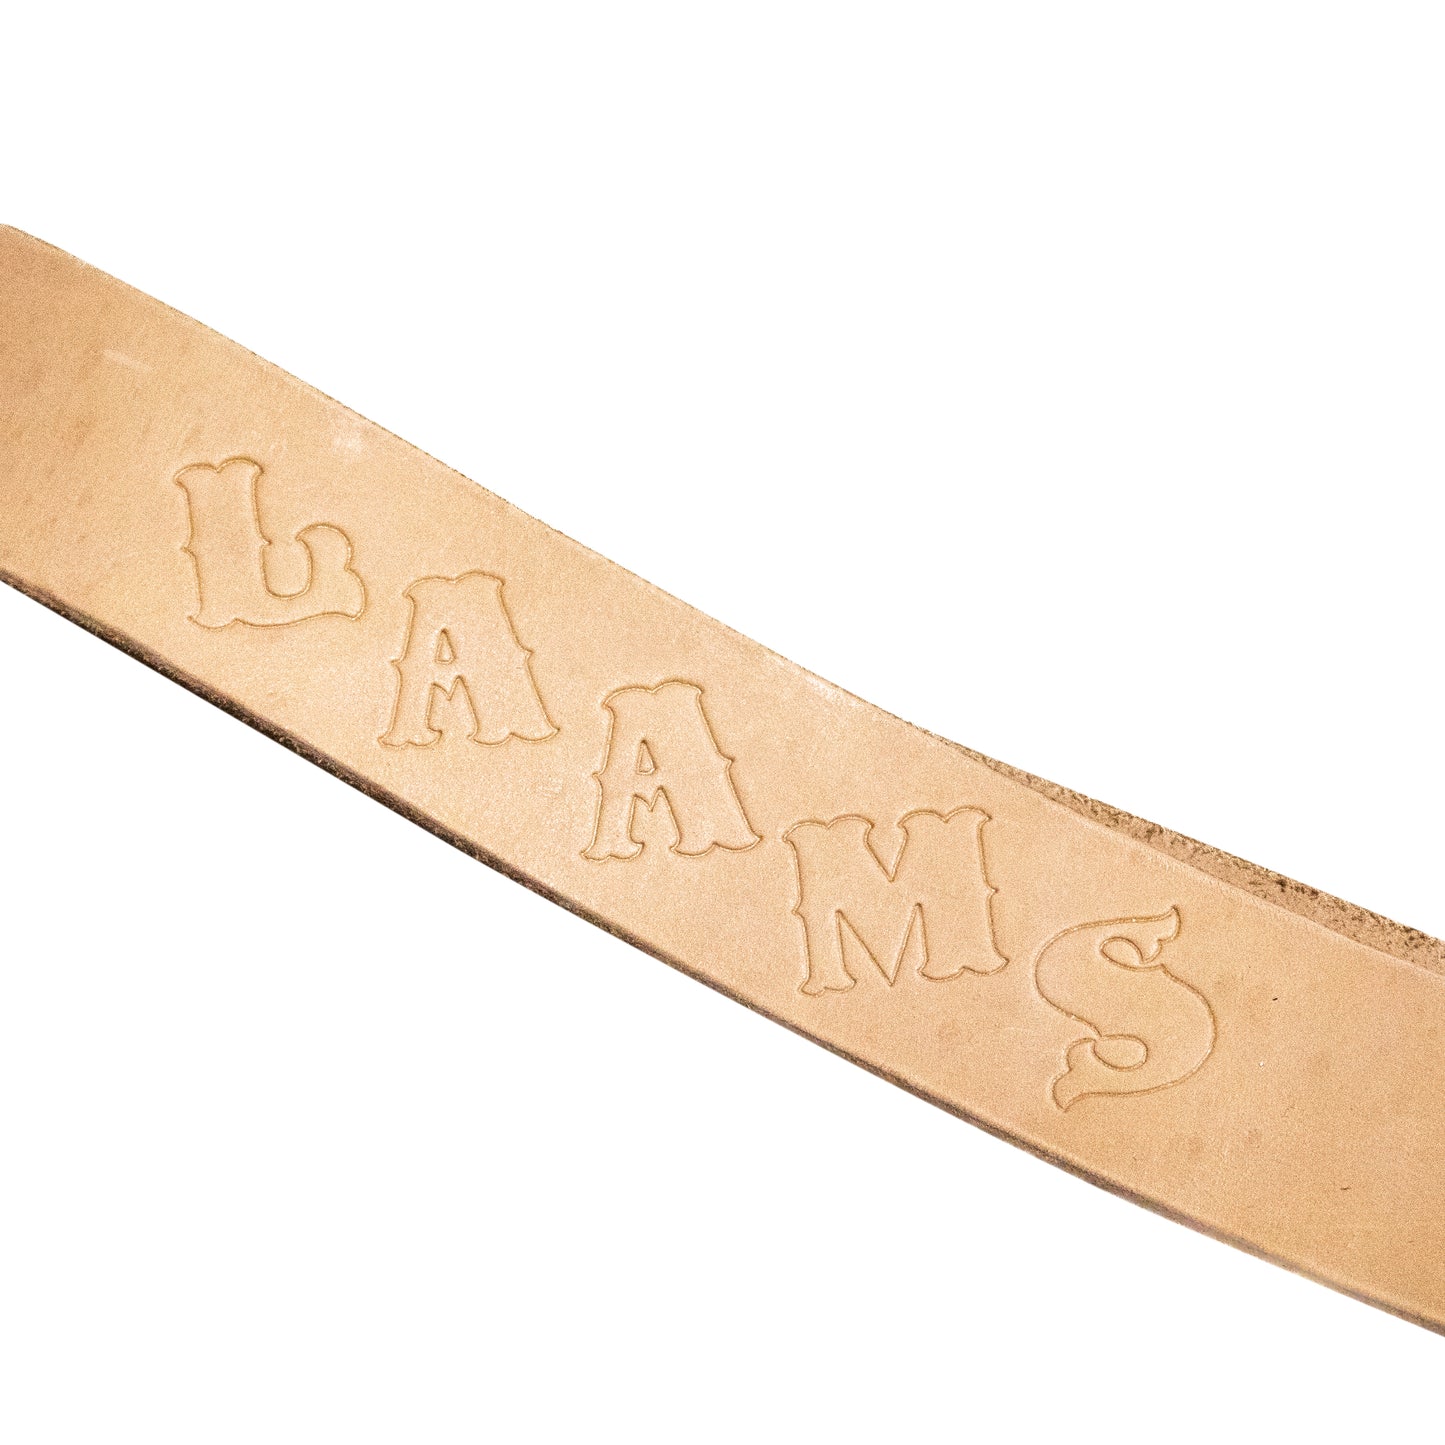 LAAMS x Pace Leather Belt